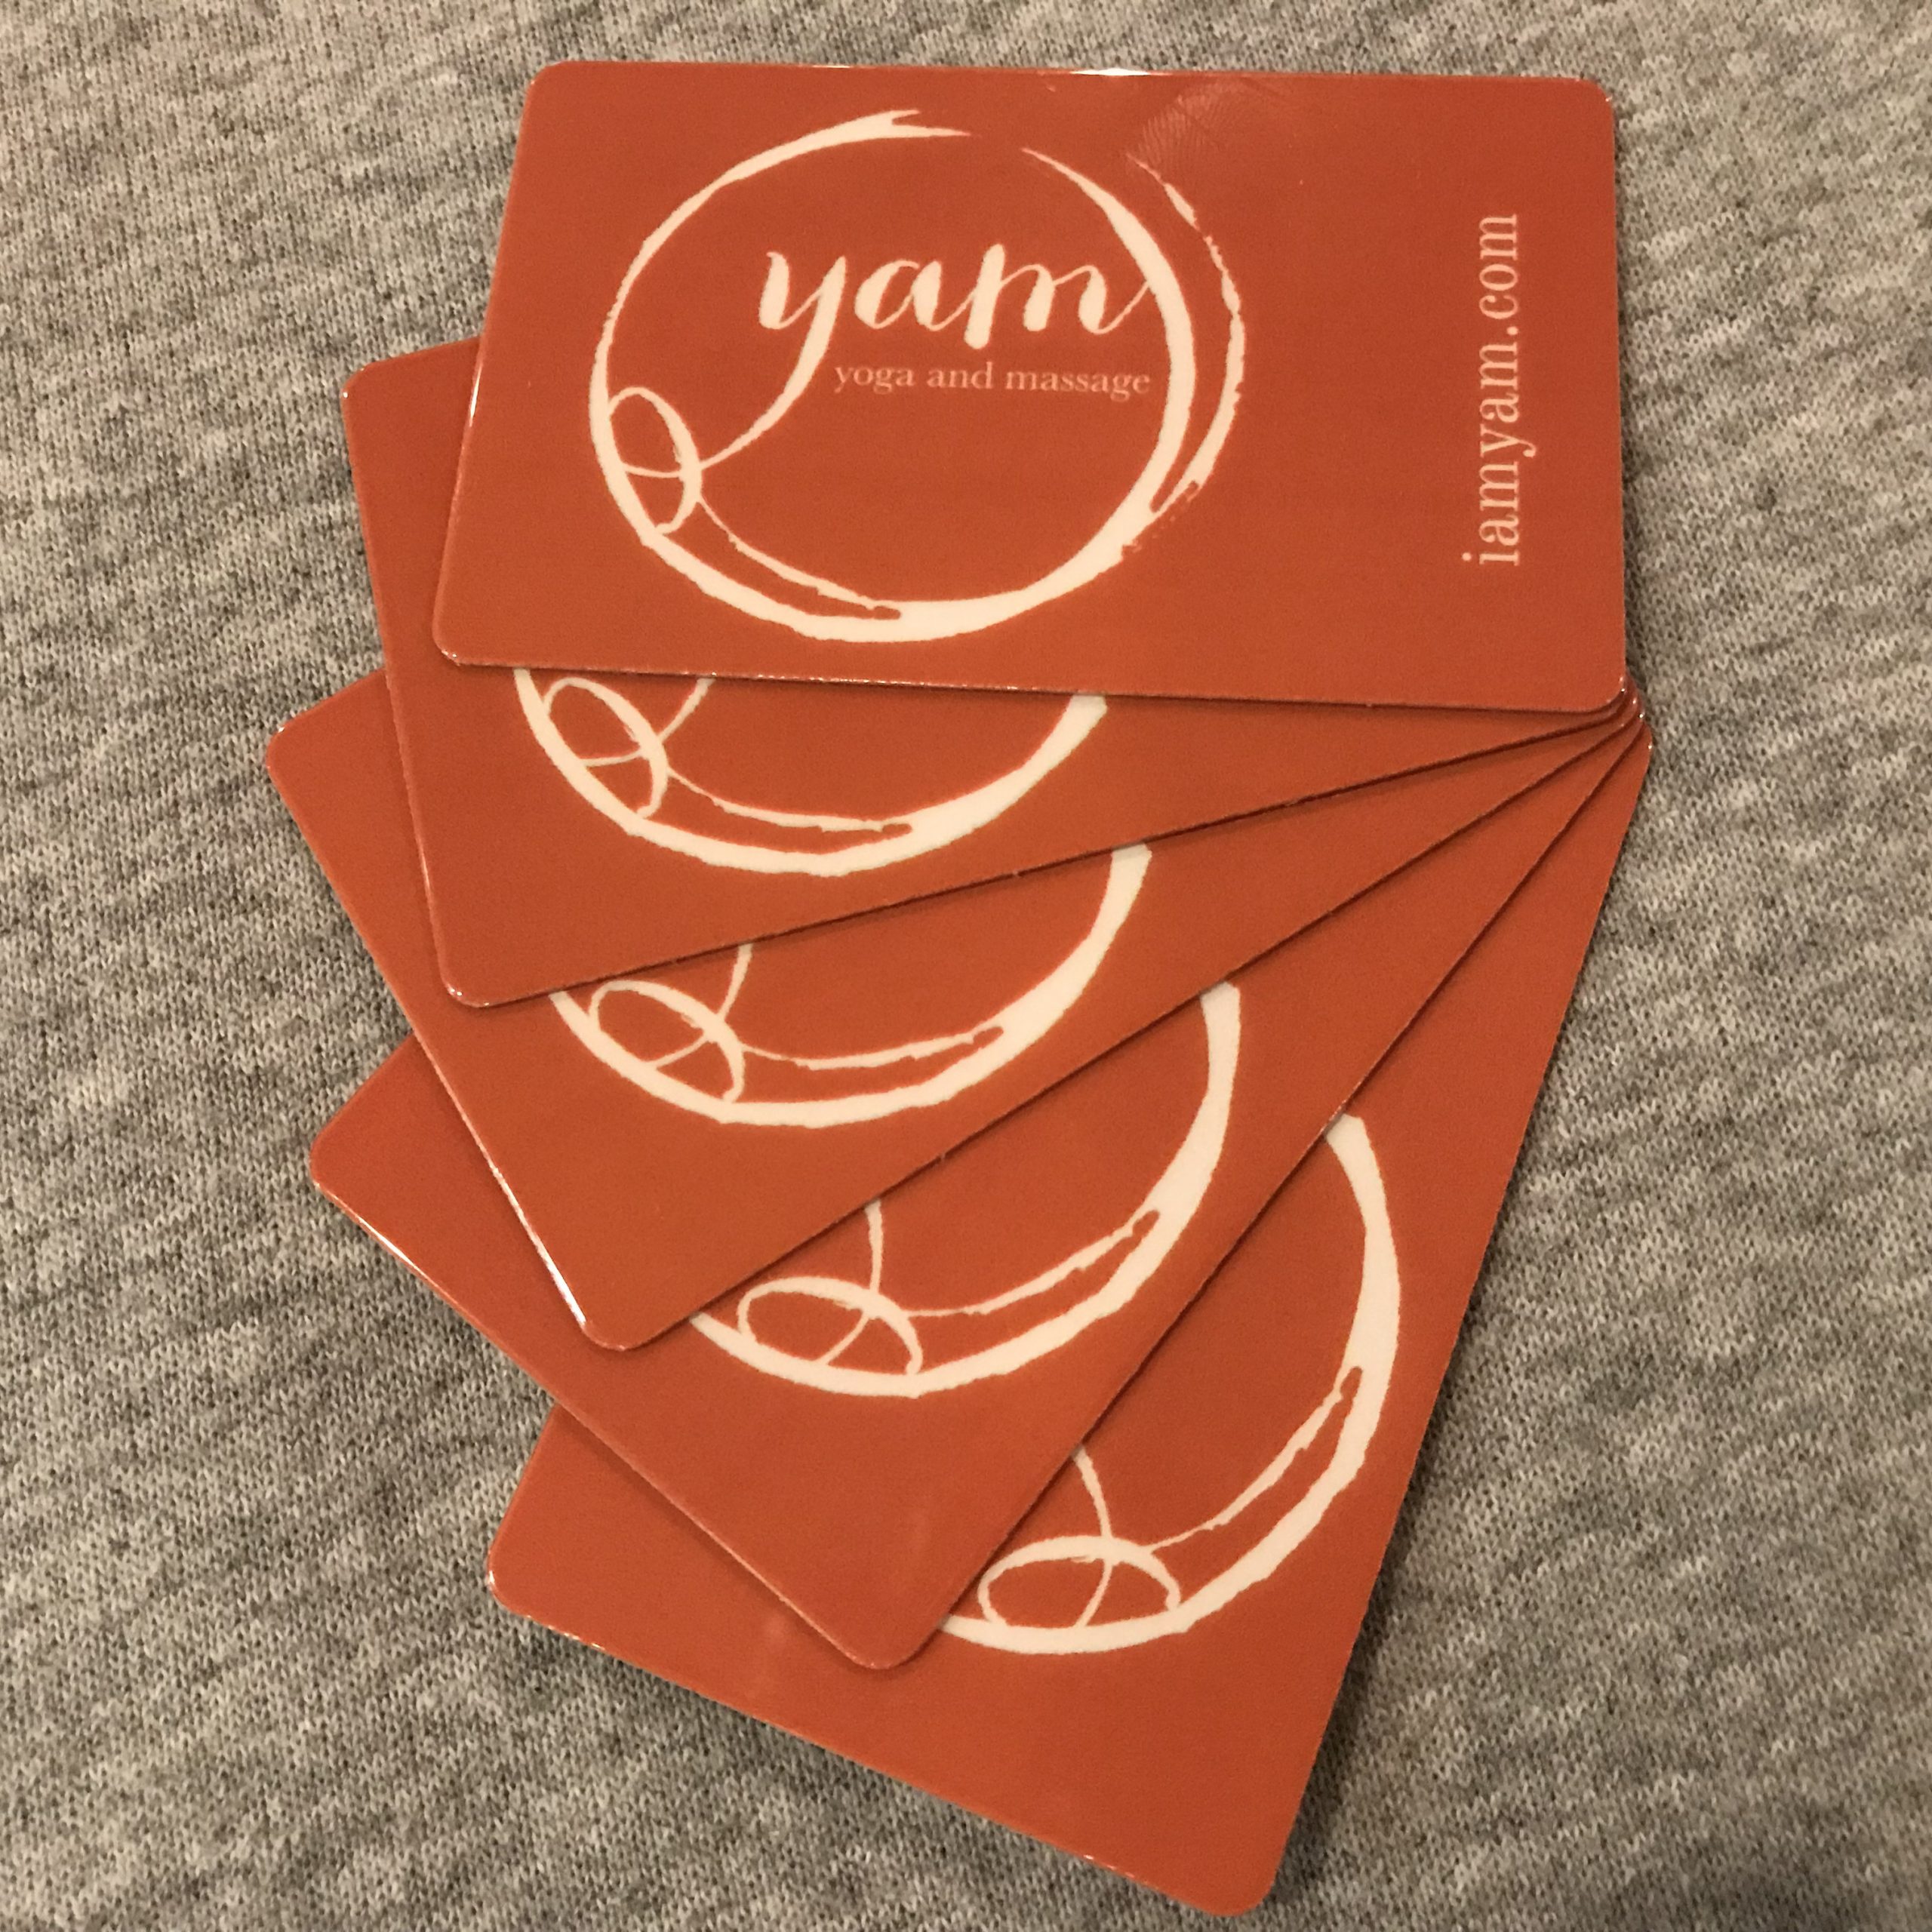 Modo Yoga Portland Gift Cards and Gift Certificate - 400 SE Grand Ave,  Portland, OR